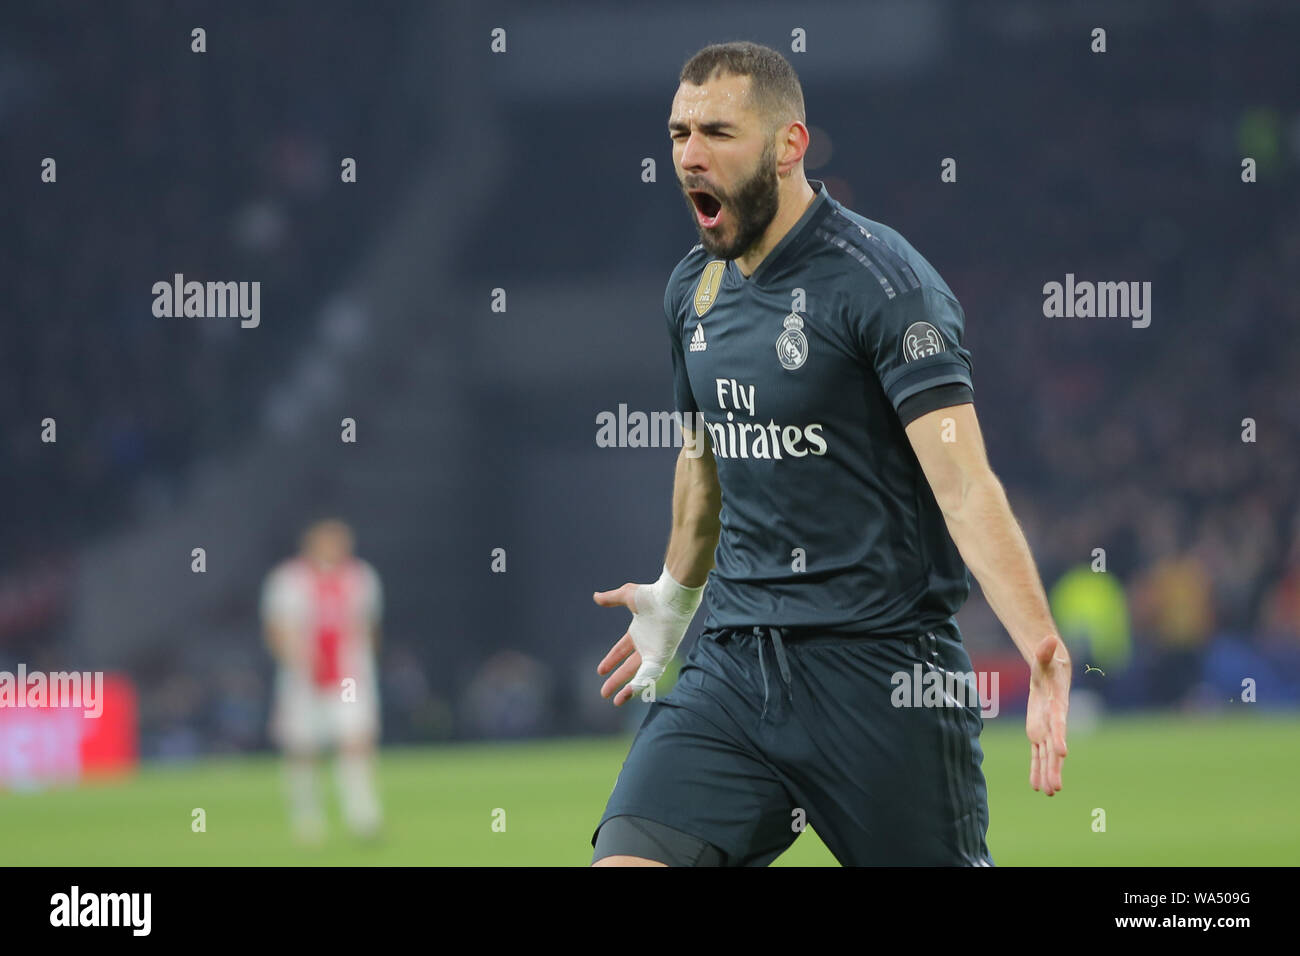 Real Madrid forward, Karim Benzema, celebrates the goal during a UEFA Champions League match playoff 1/8 finals game against Ajax Stock Photo